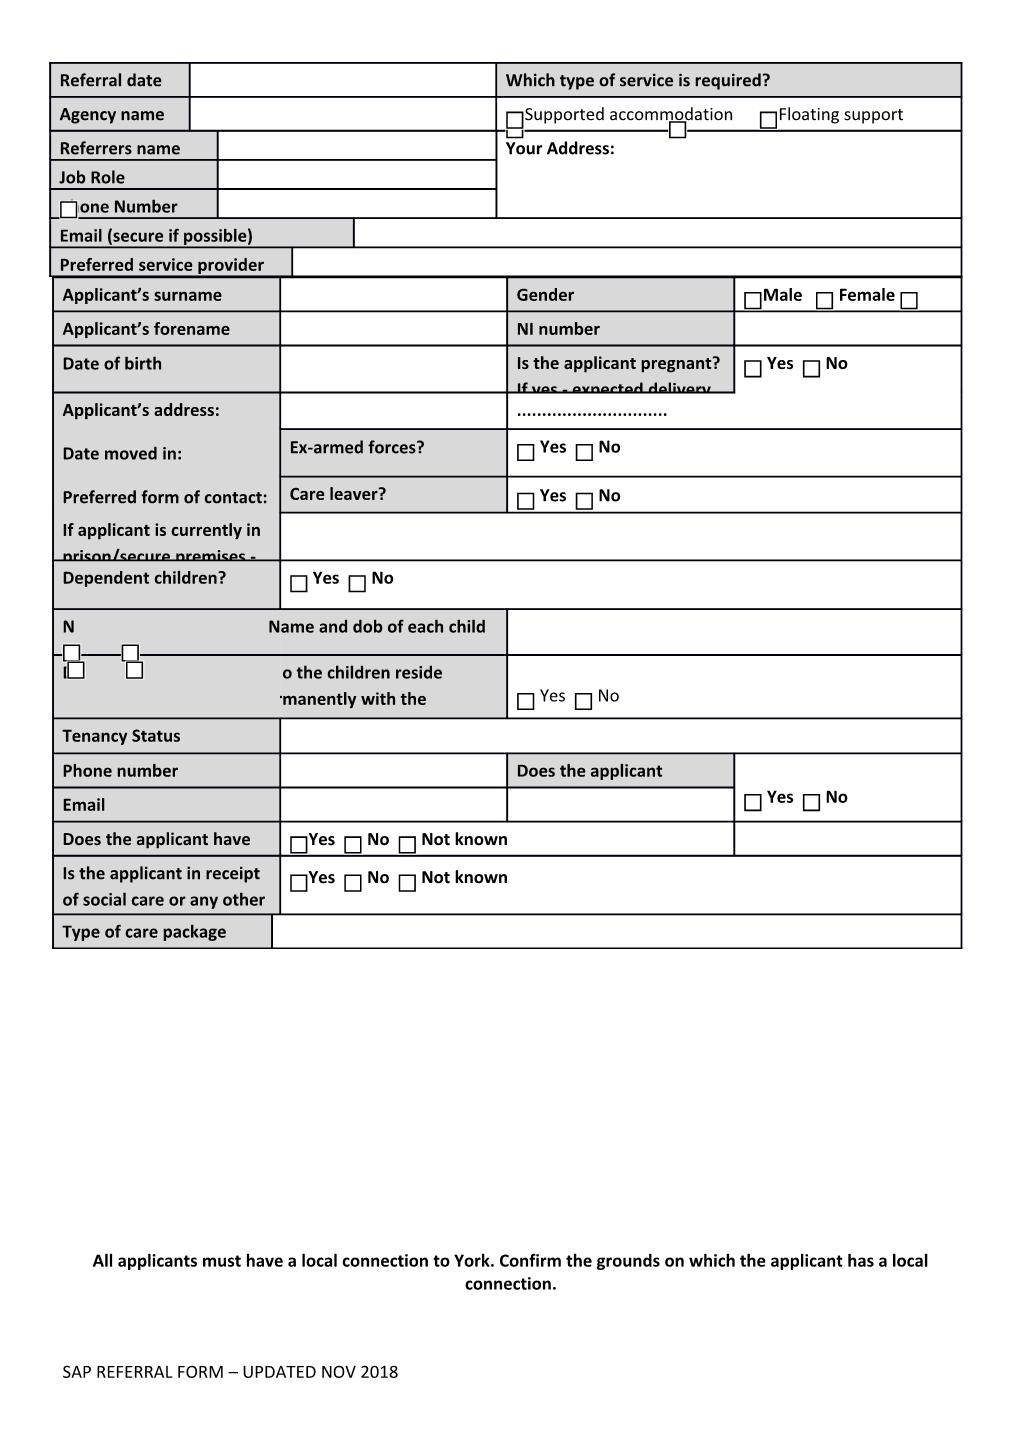 Single Access Point Referral Form